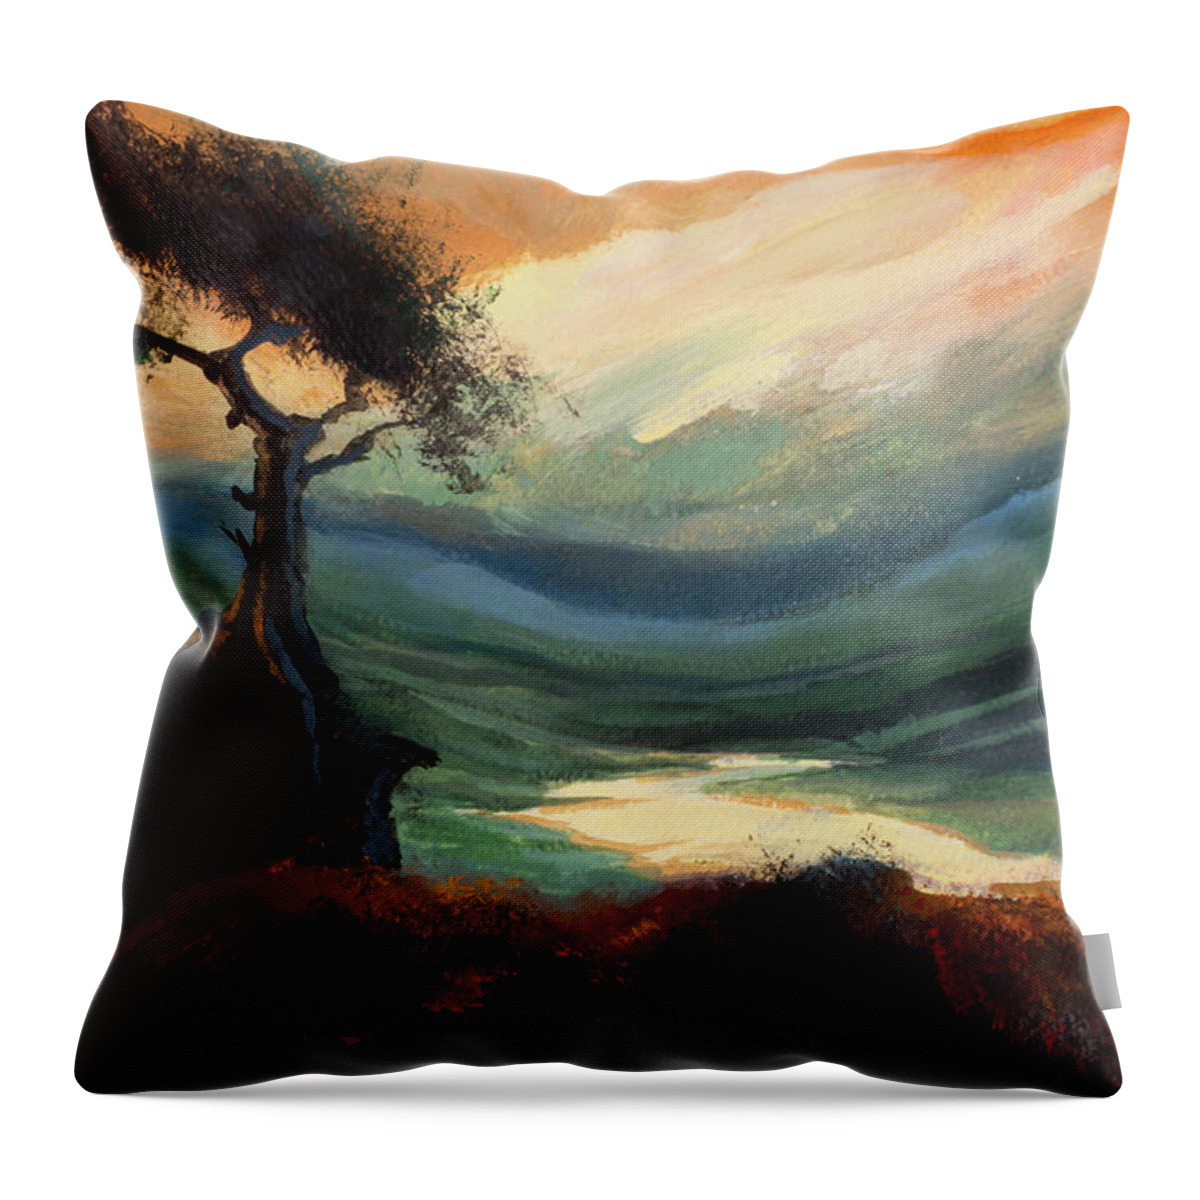 #creativity #art&mindfulness #socialresponsibility #artforworkers #mindfulness Throw Pillow featuring the painting Yellow Sunset Hills by Veronica Huacuja